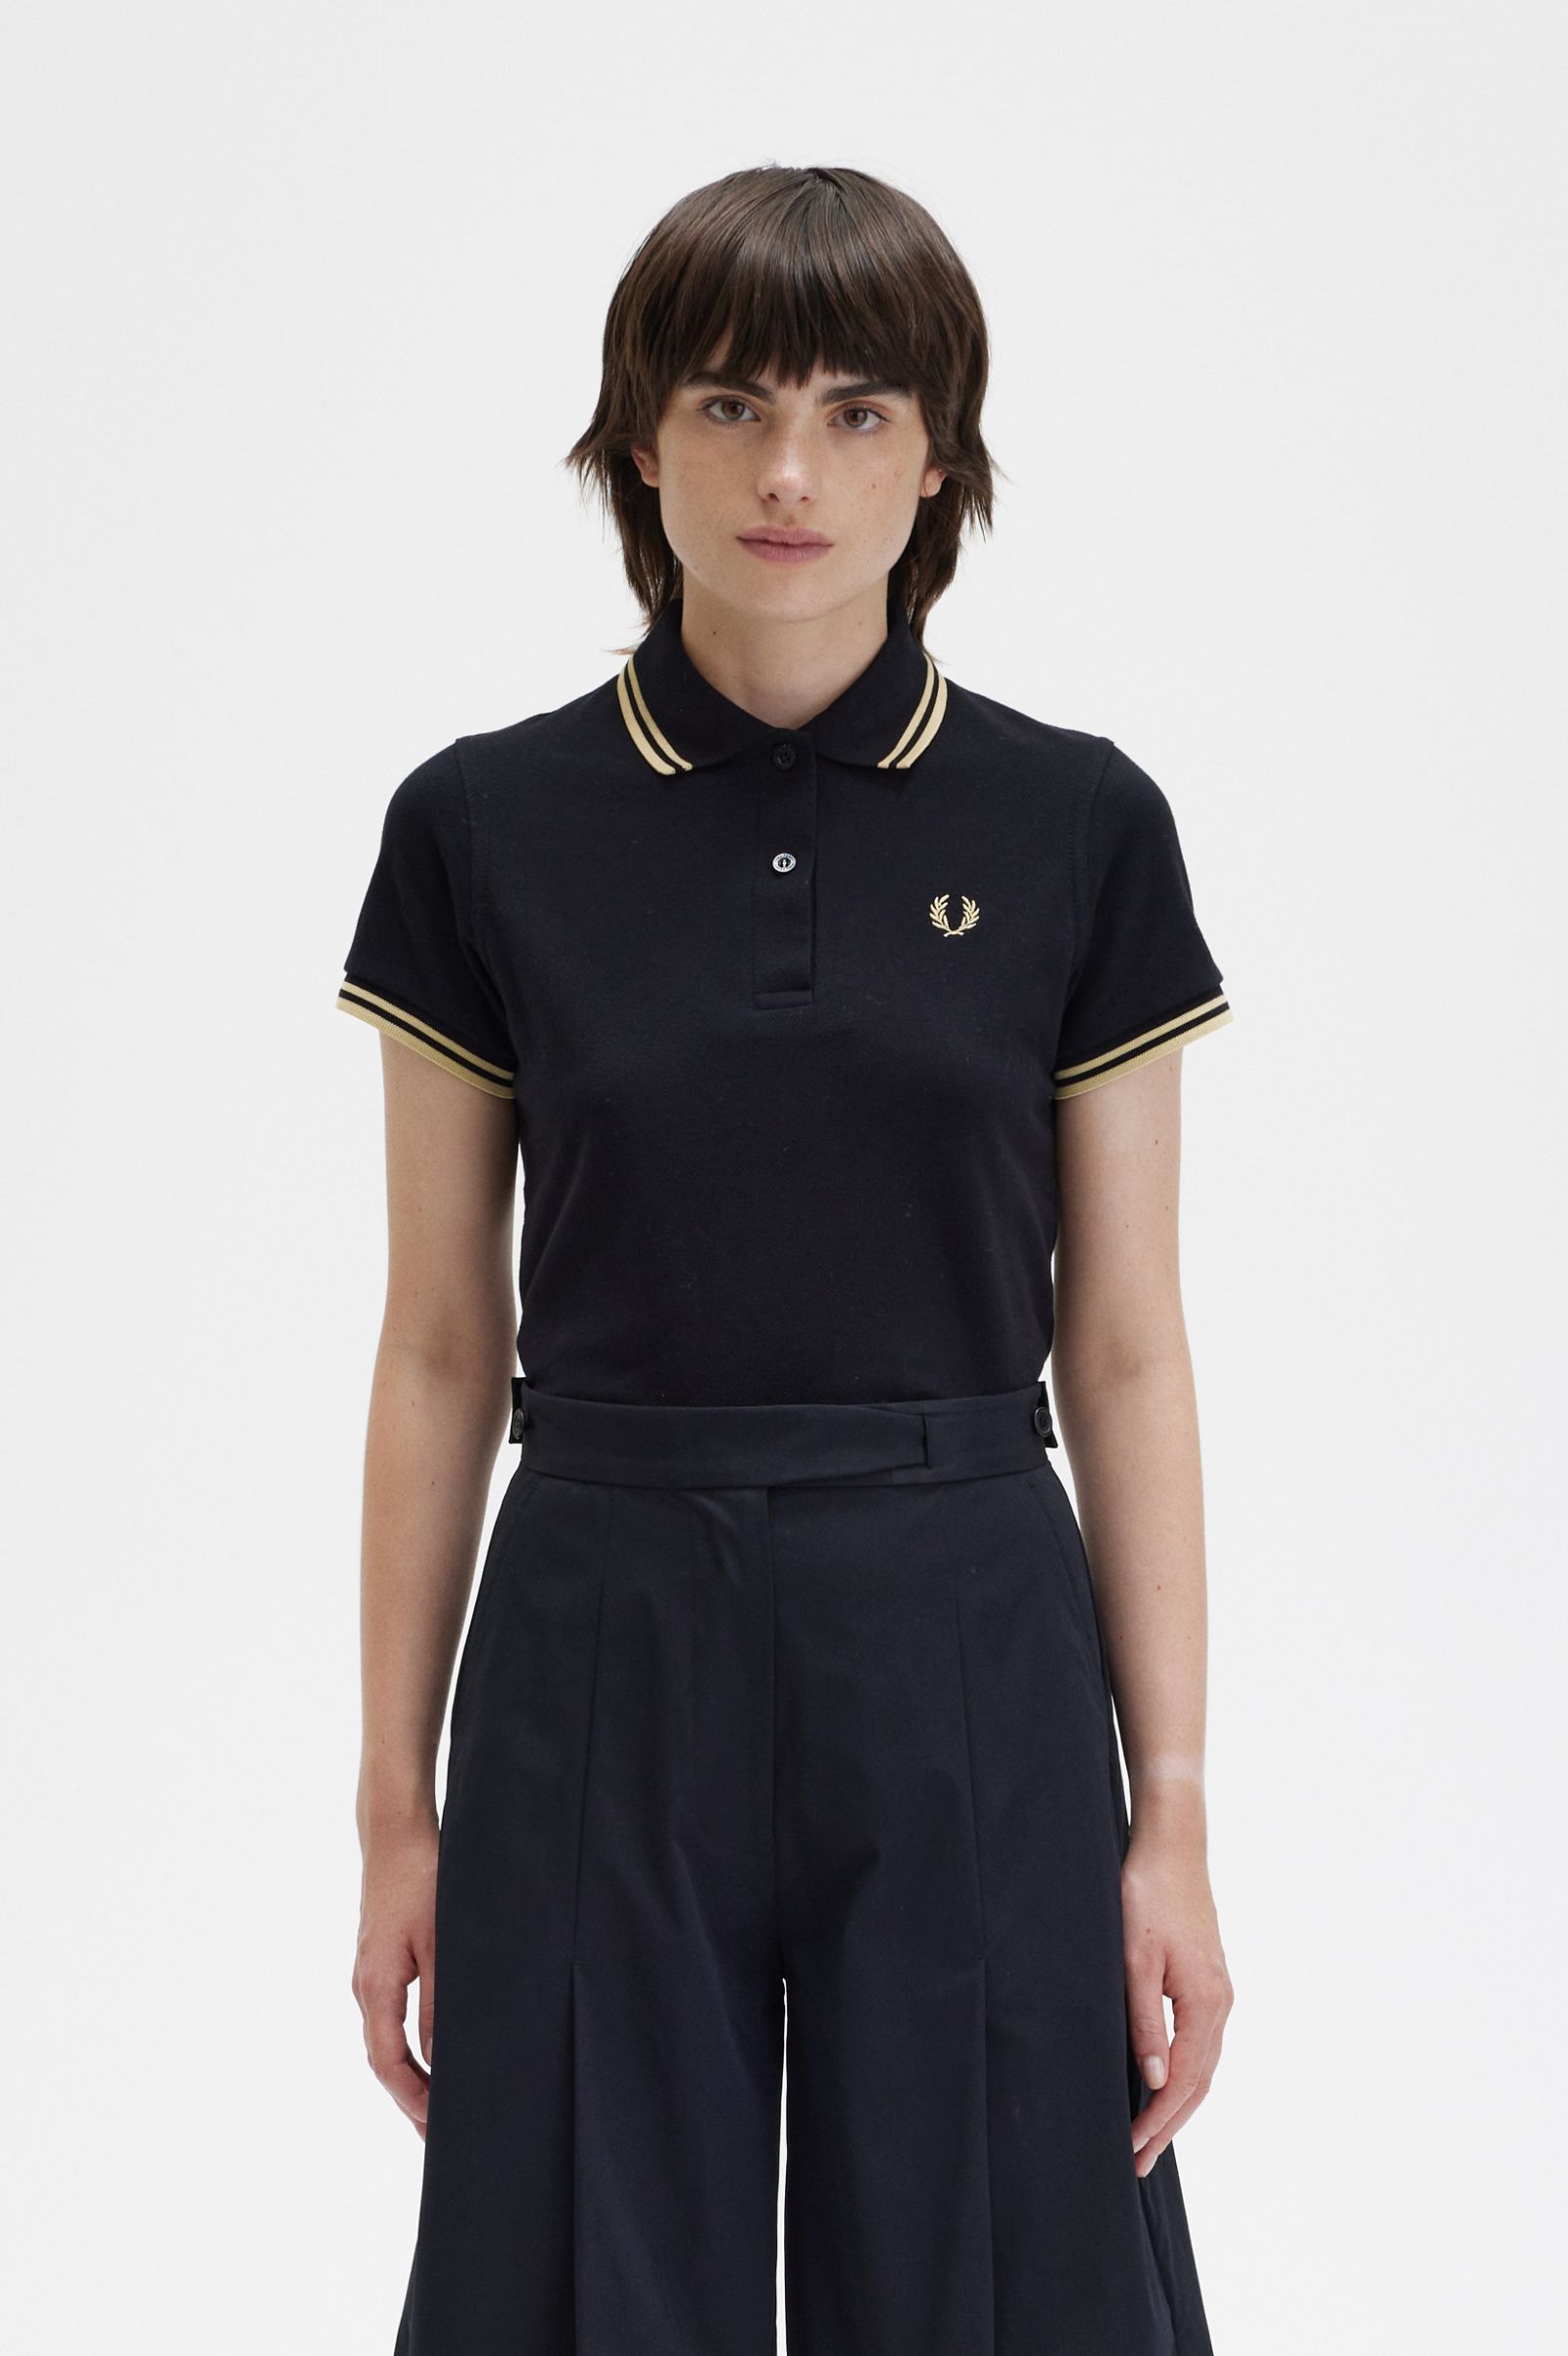 Fred perry.de